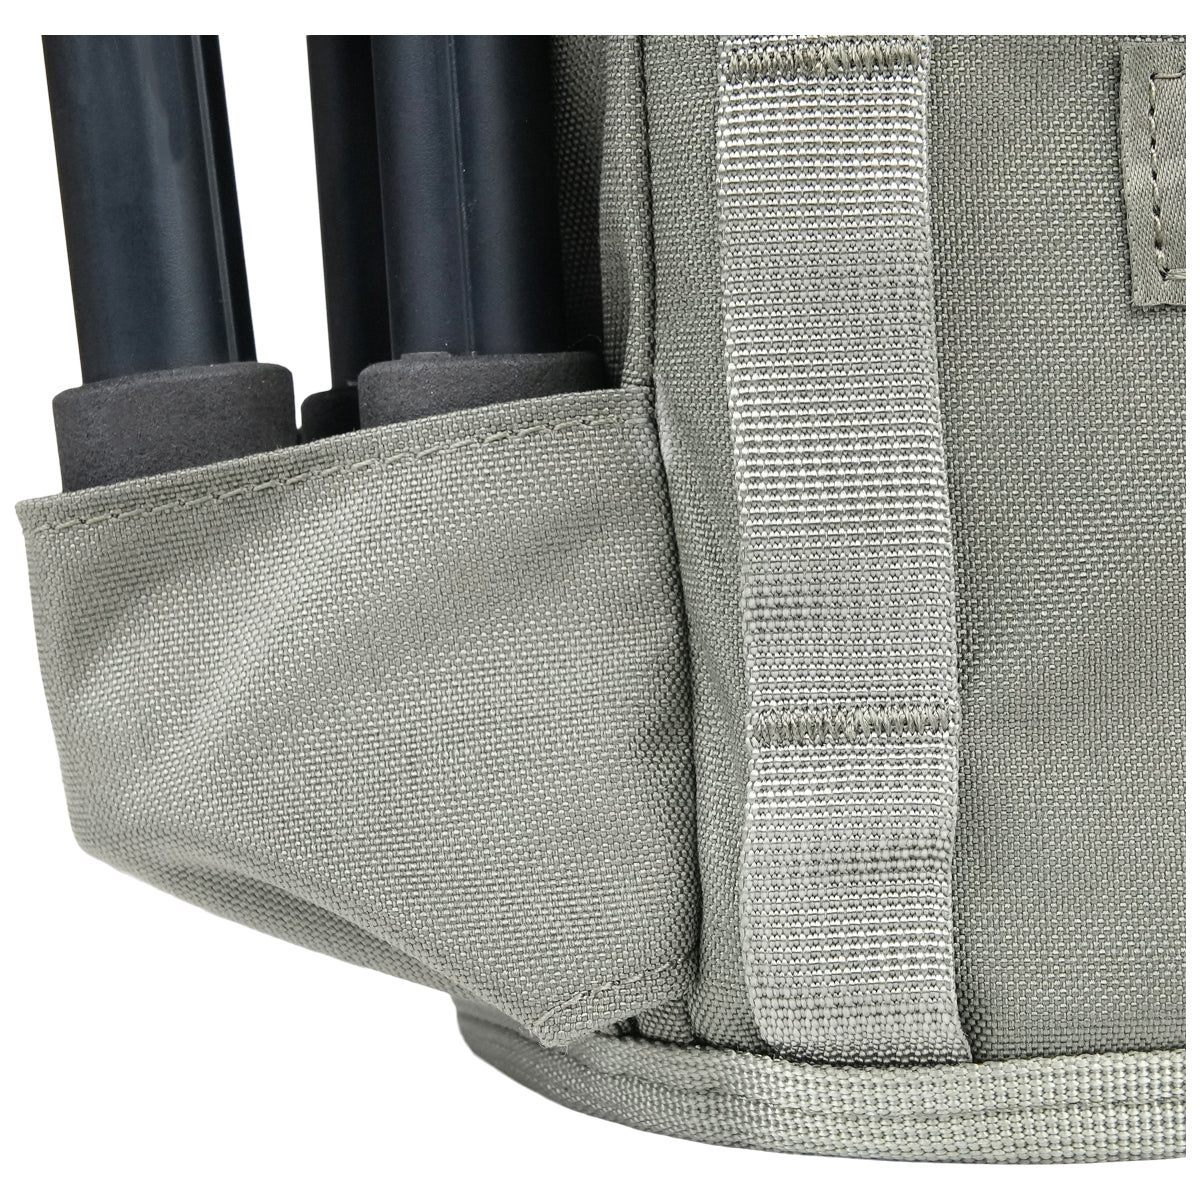 Mystery Ranch Spotting Scope Sling in Foliage by GOHUNT | Mystery Ranch - GOHUNT Shop